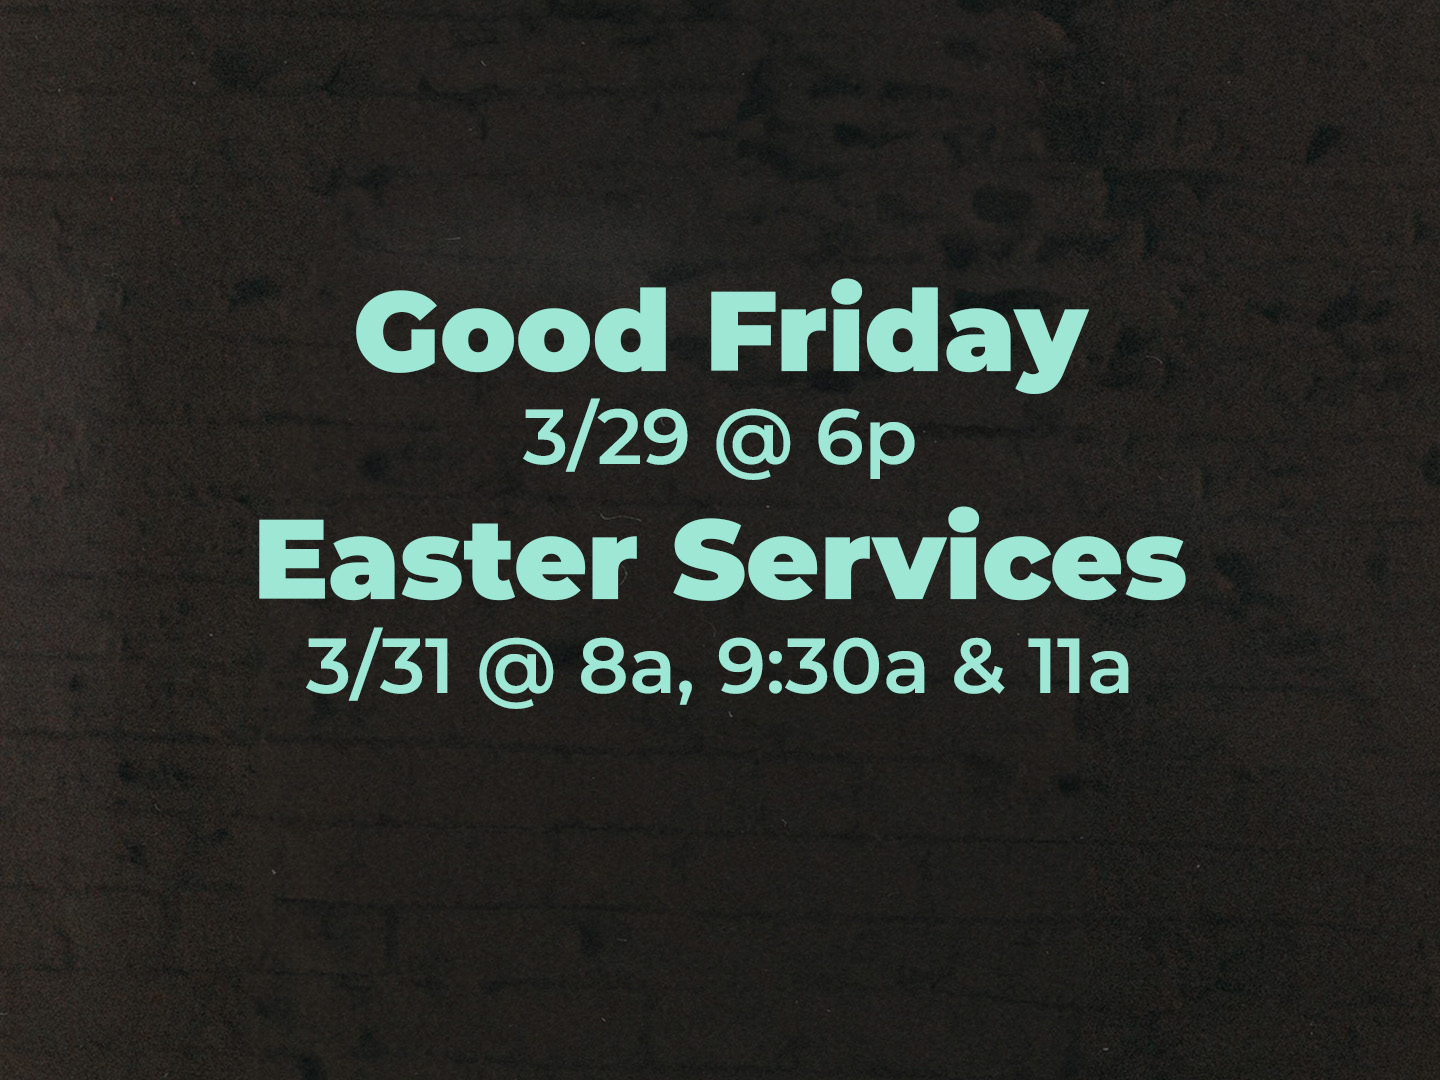 Easter Service Times thumbnail